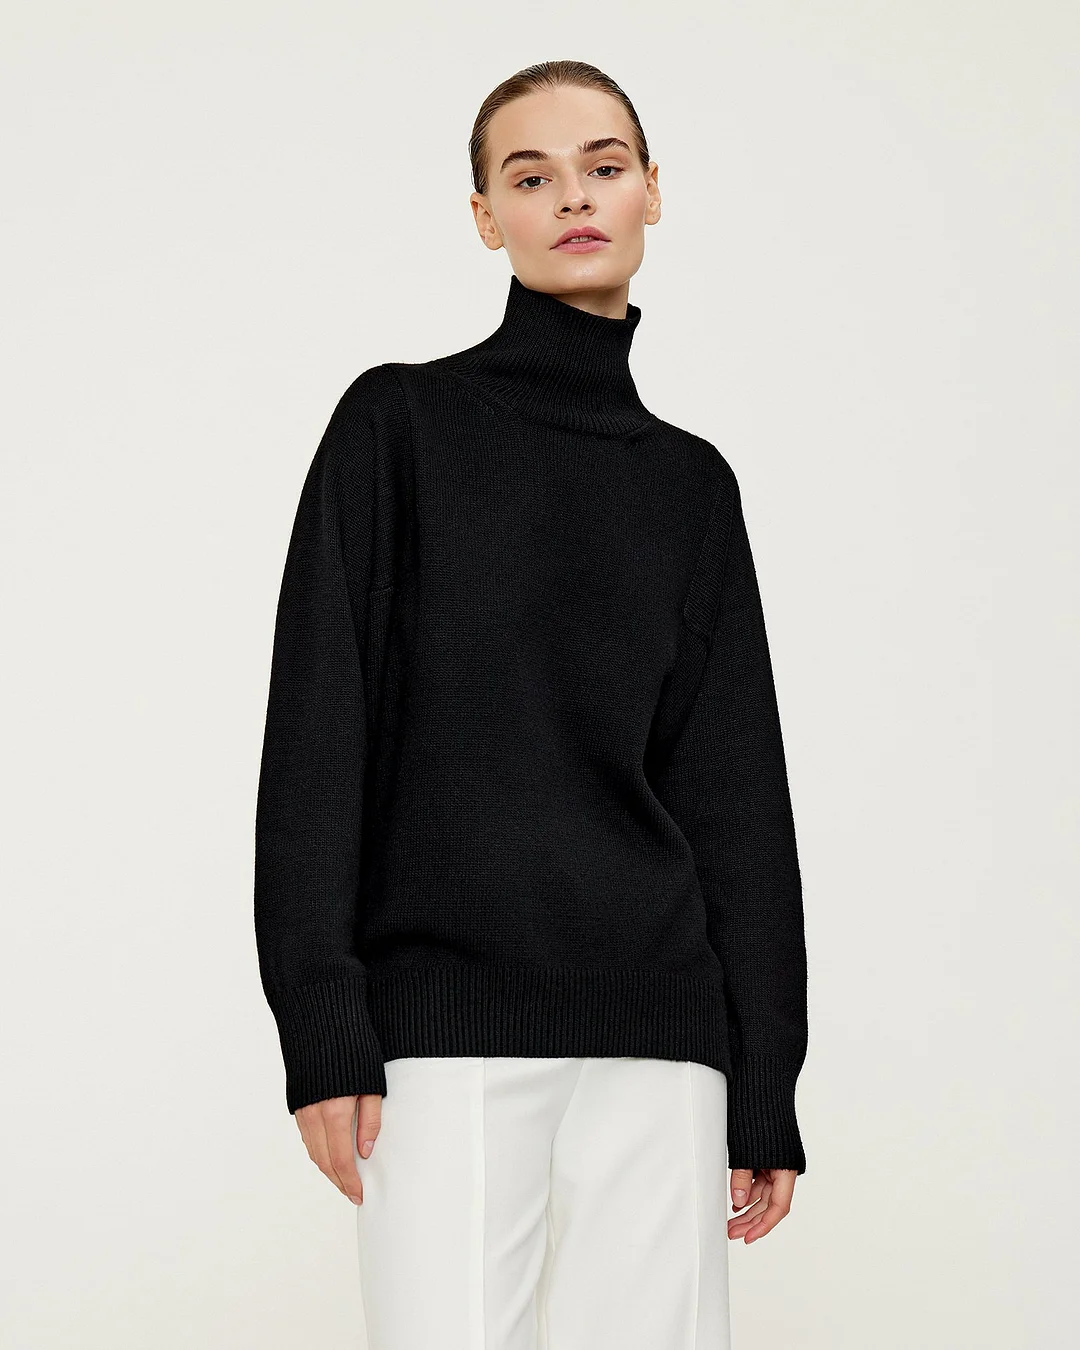 High Neck Sweater Loose Fitting